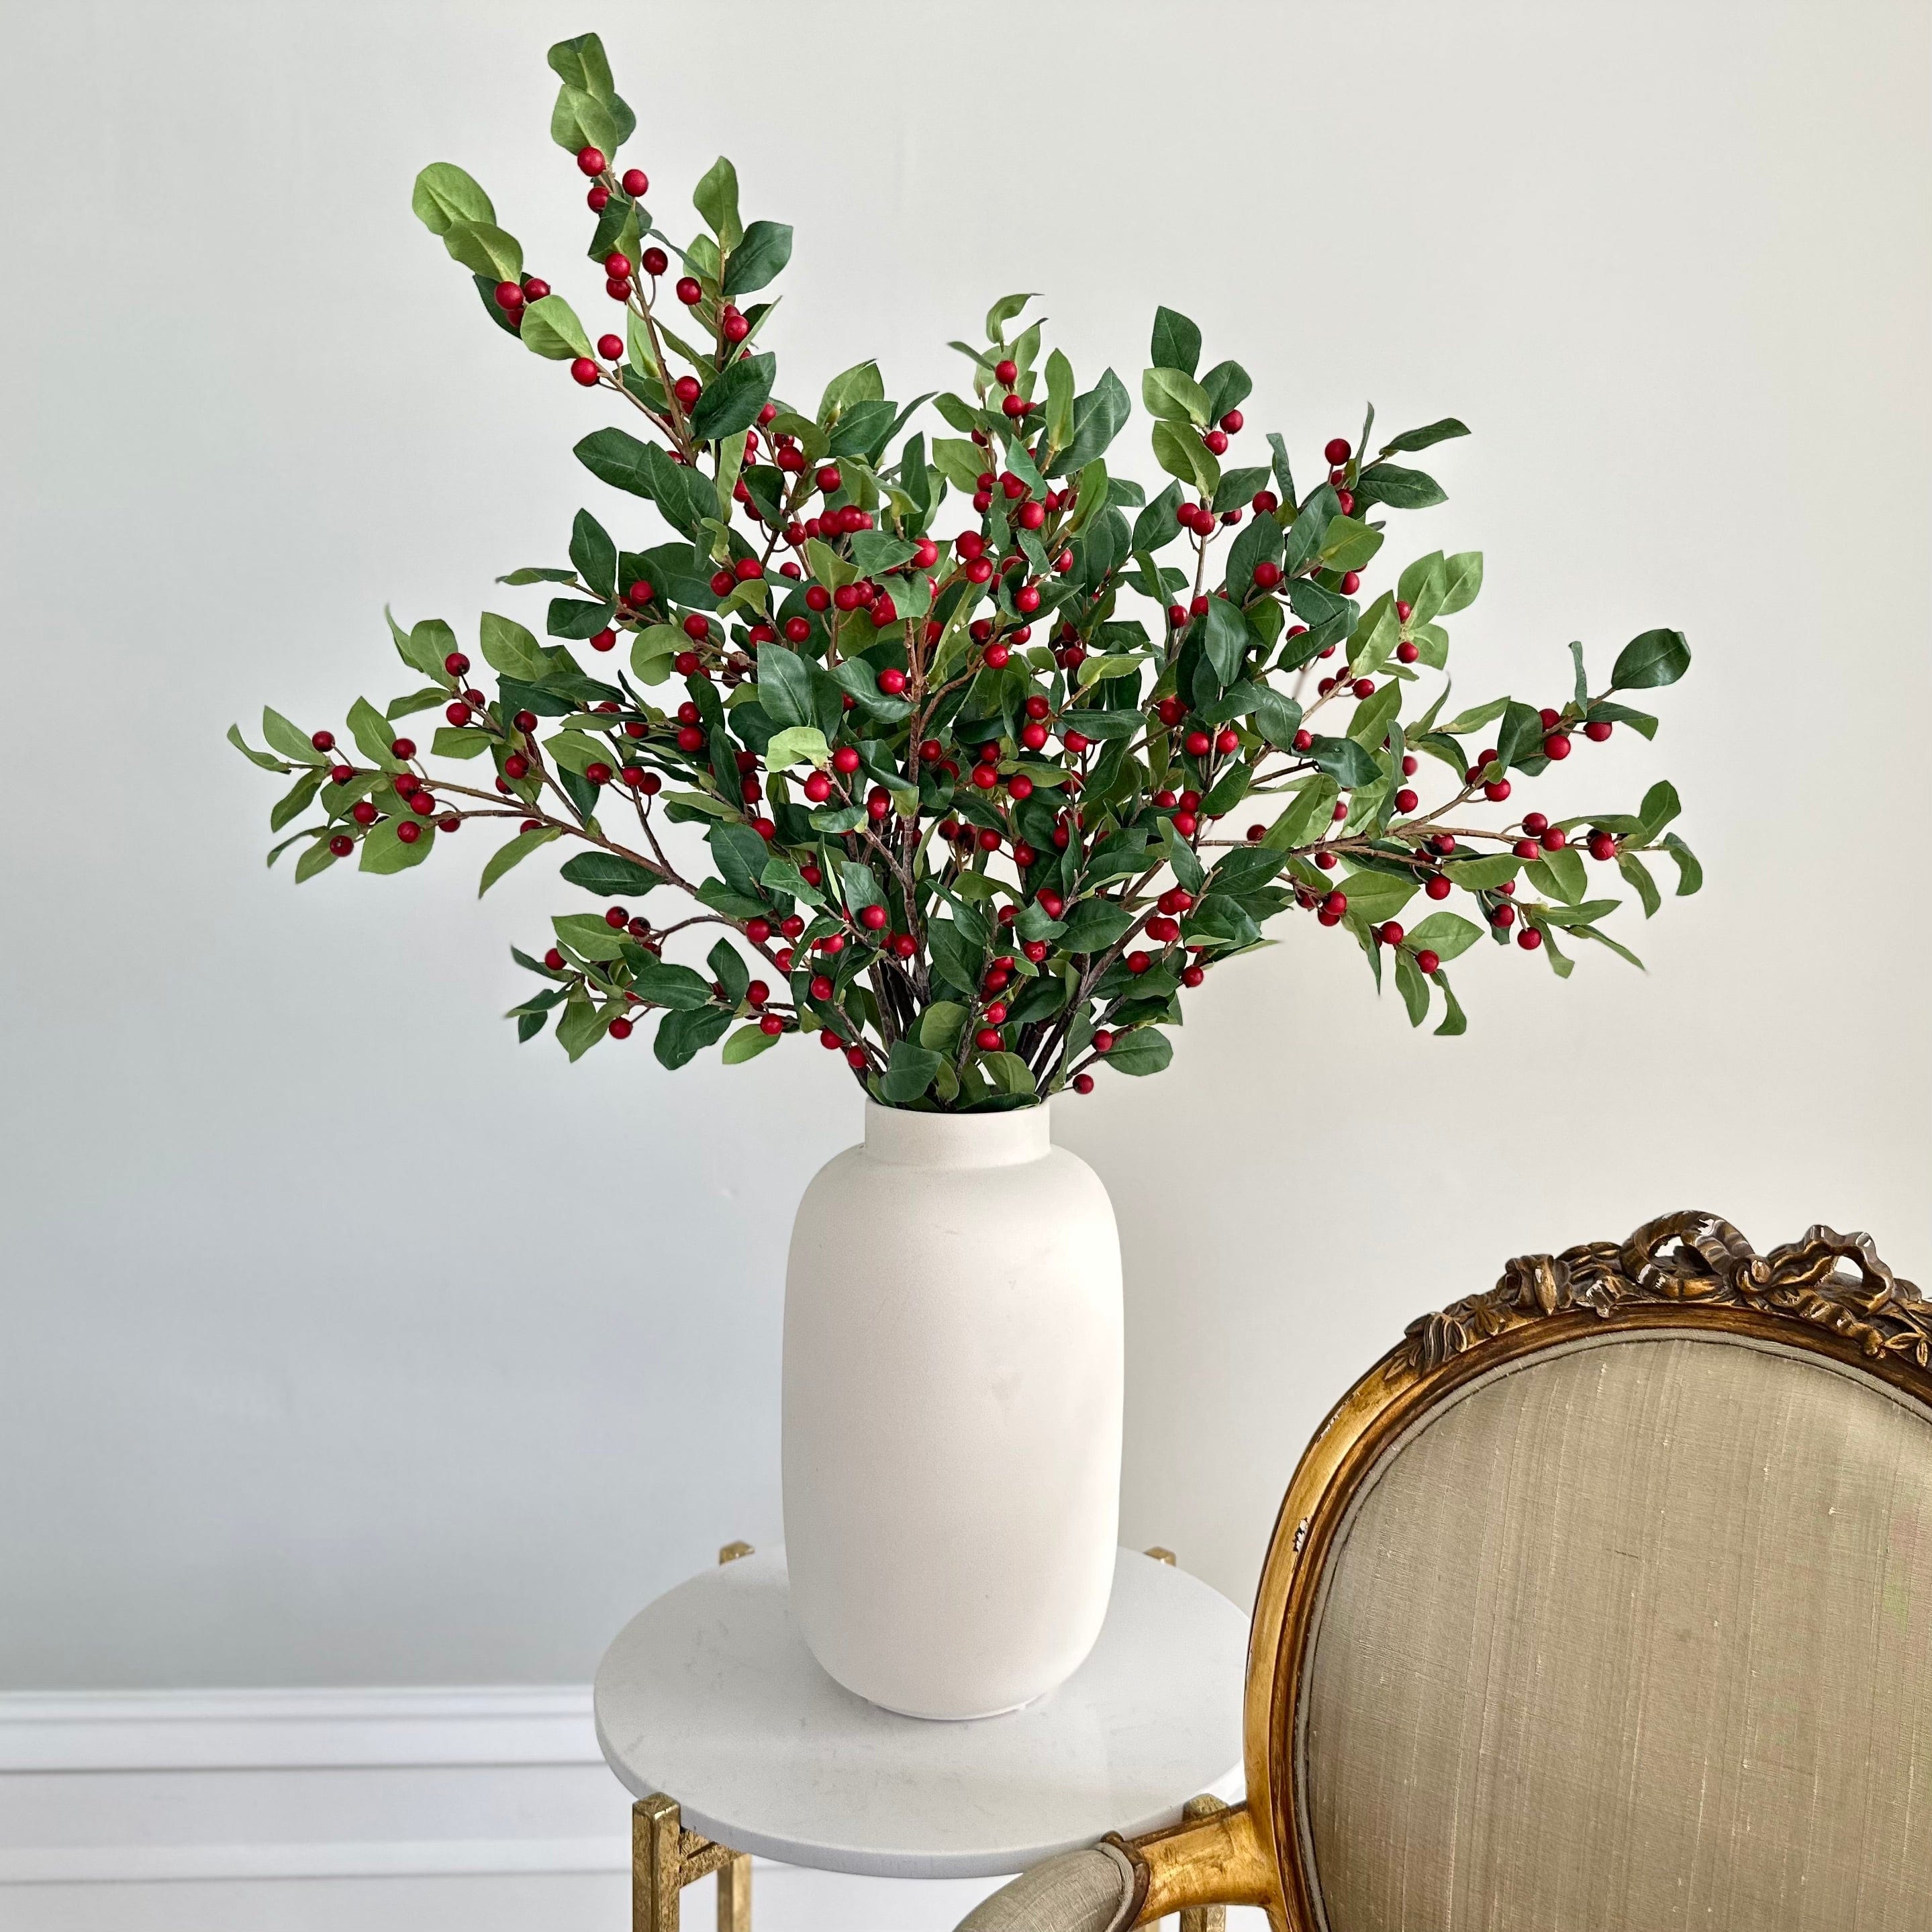 Artificial flowers luxury faux silk red berries with leaves Kingham Vase lifelike realistic faux flowers from The Faux Flower Company ABX0683RD ABP04B3